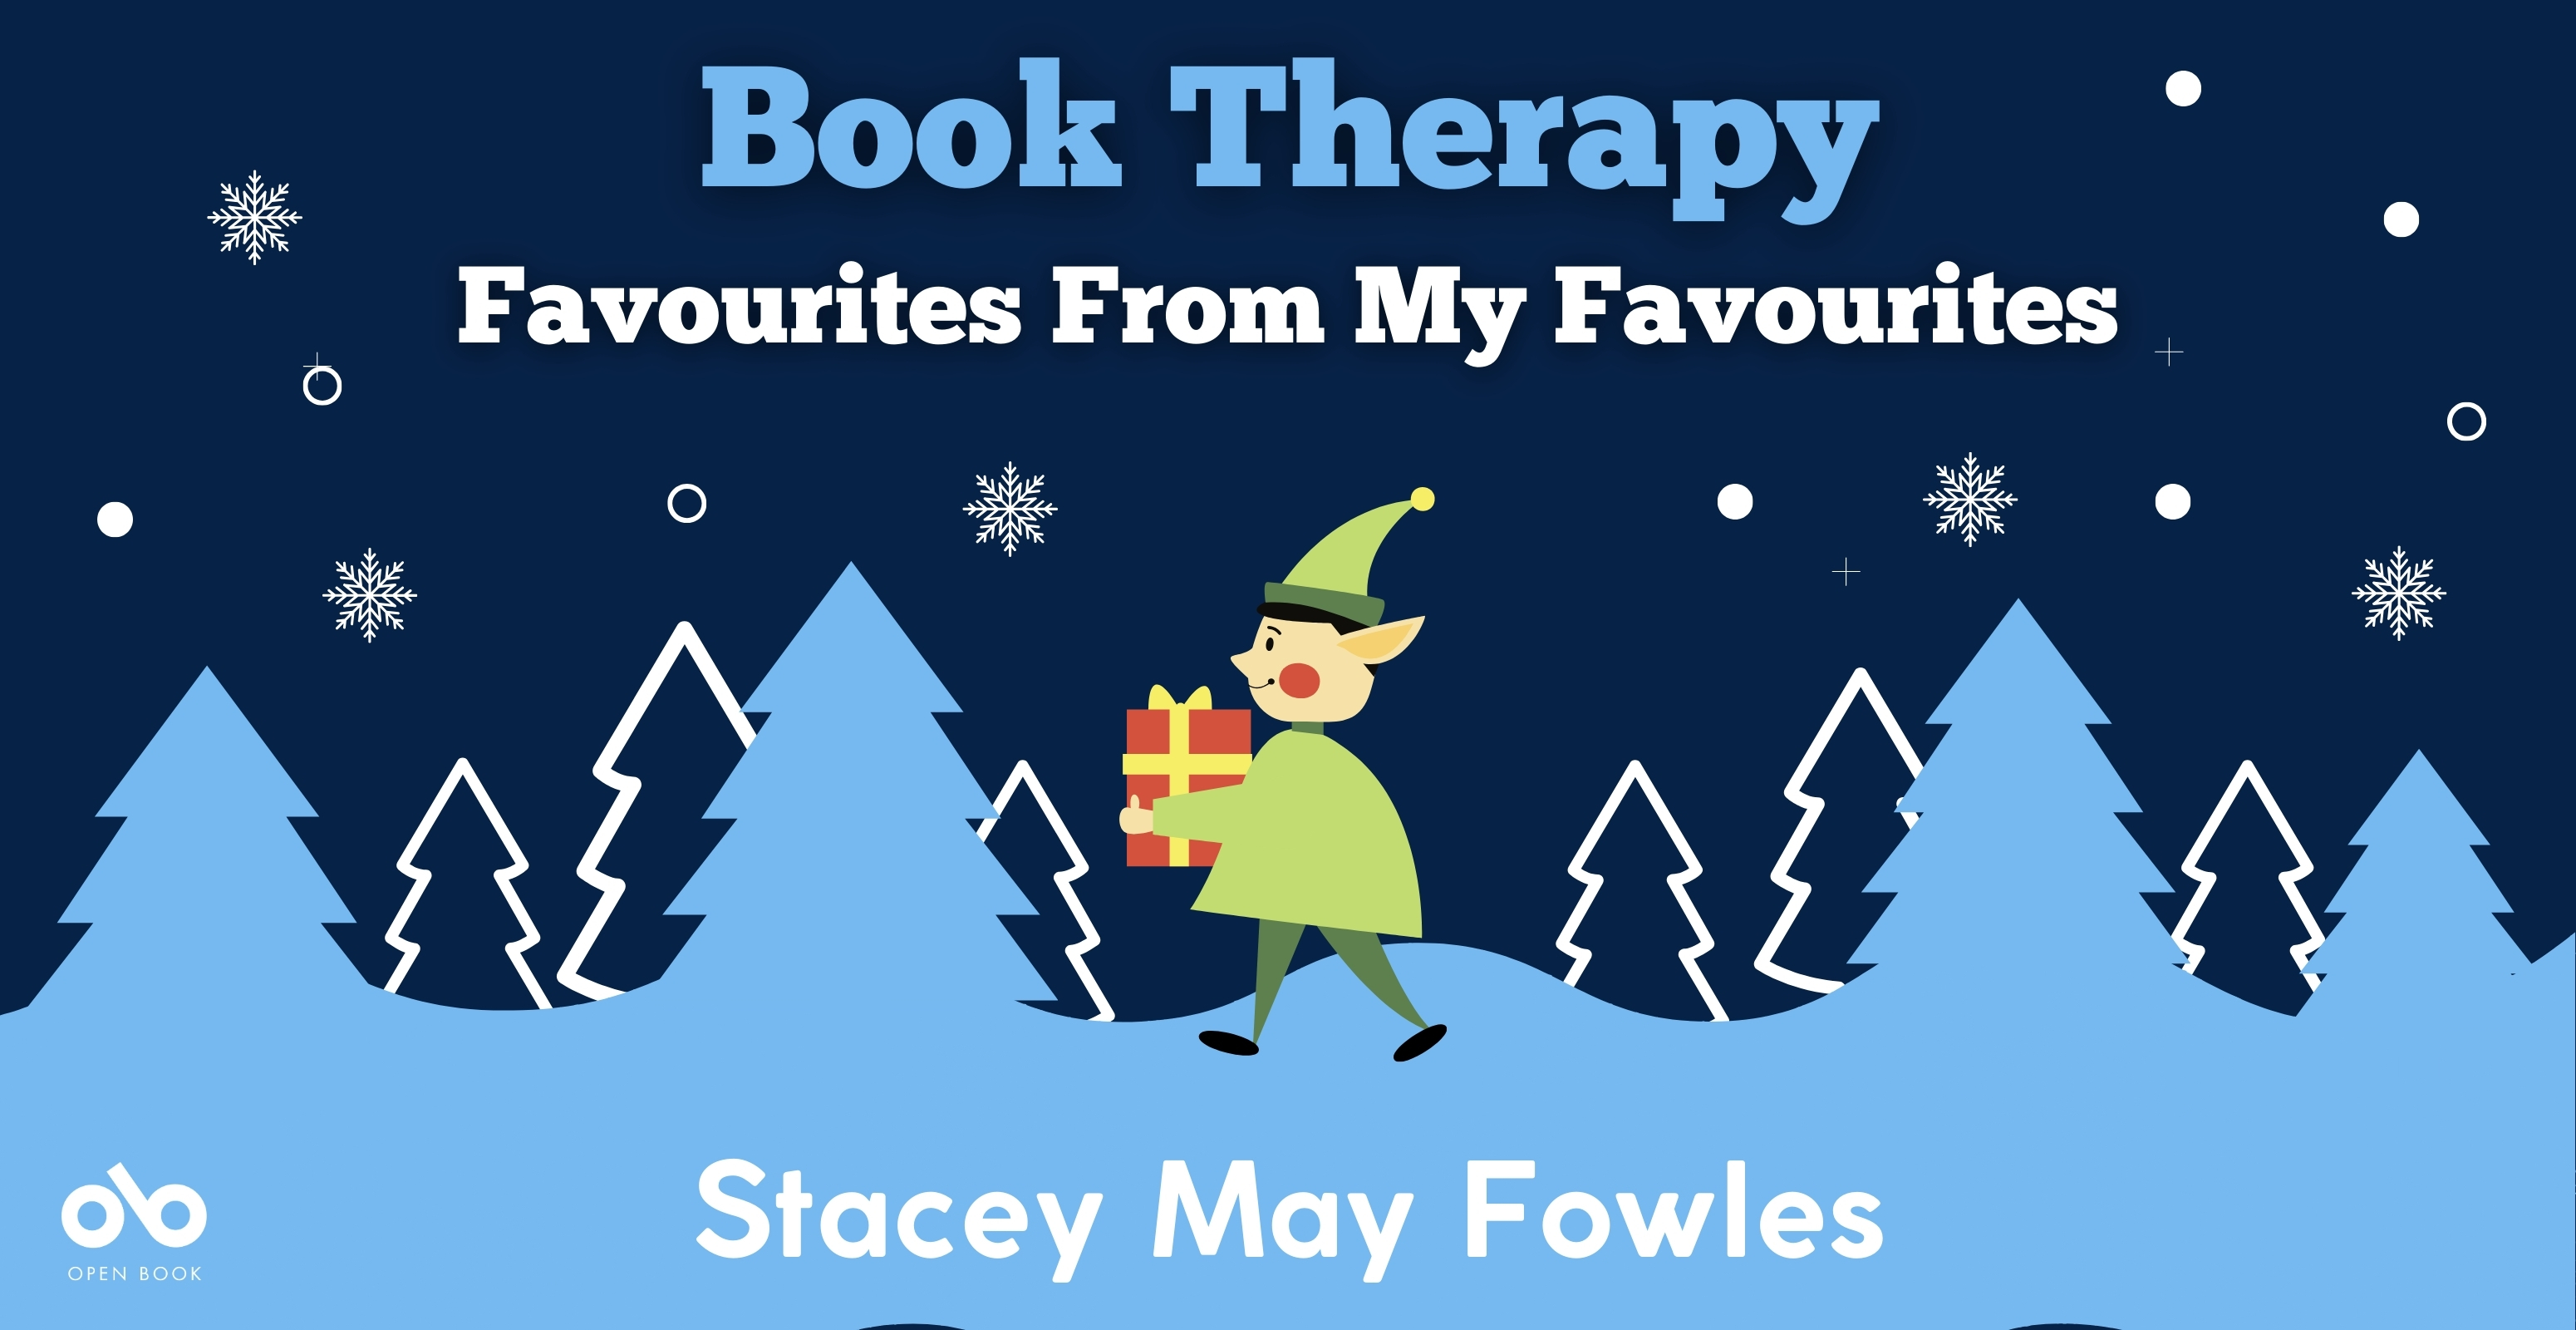 Book Therapy Favourites From My Favourites - Stacey May Fowles